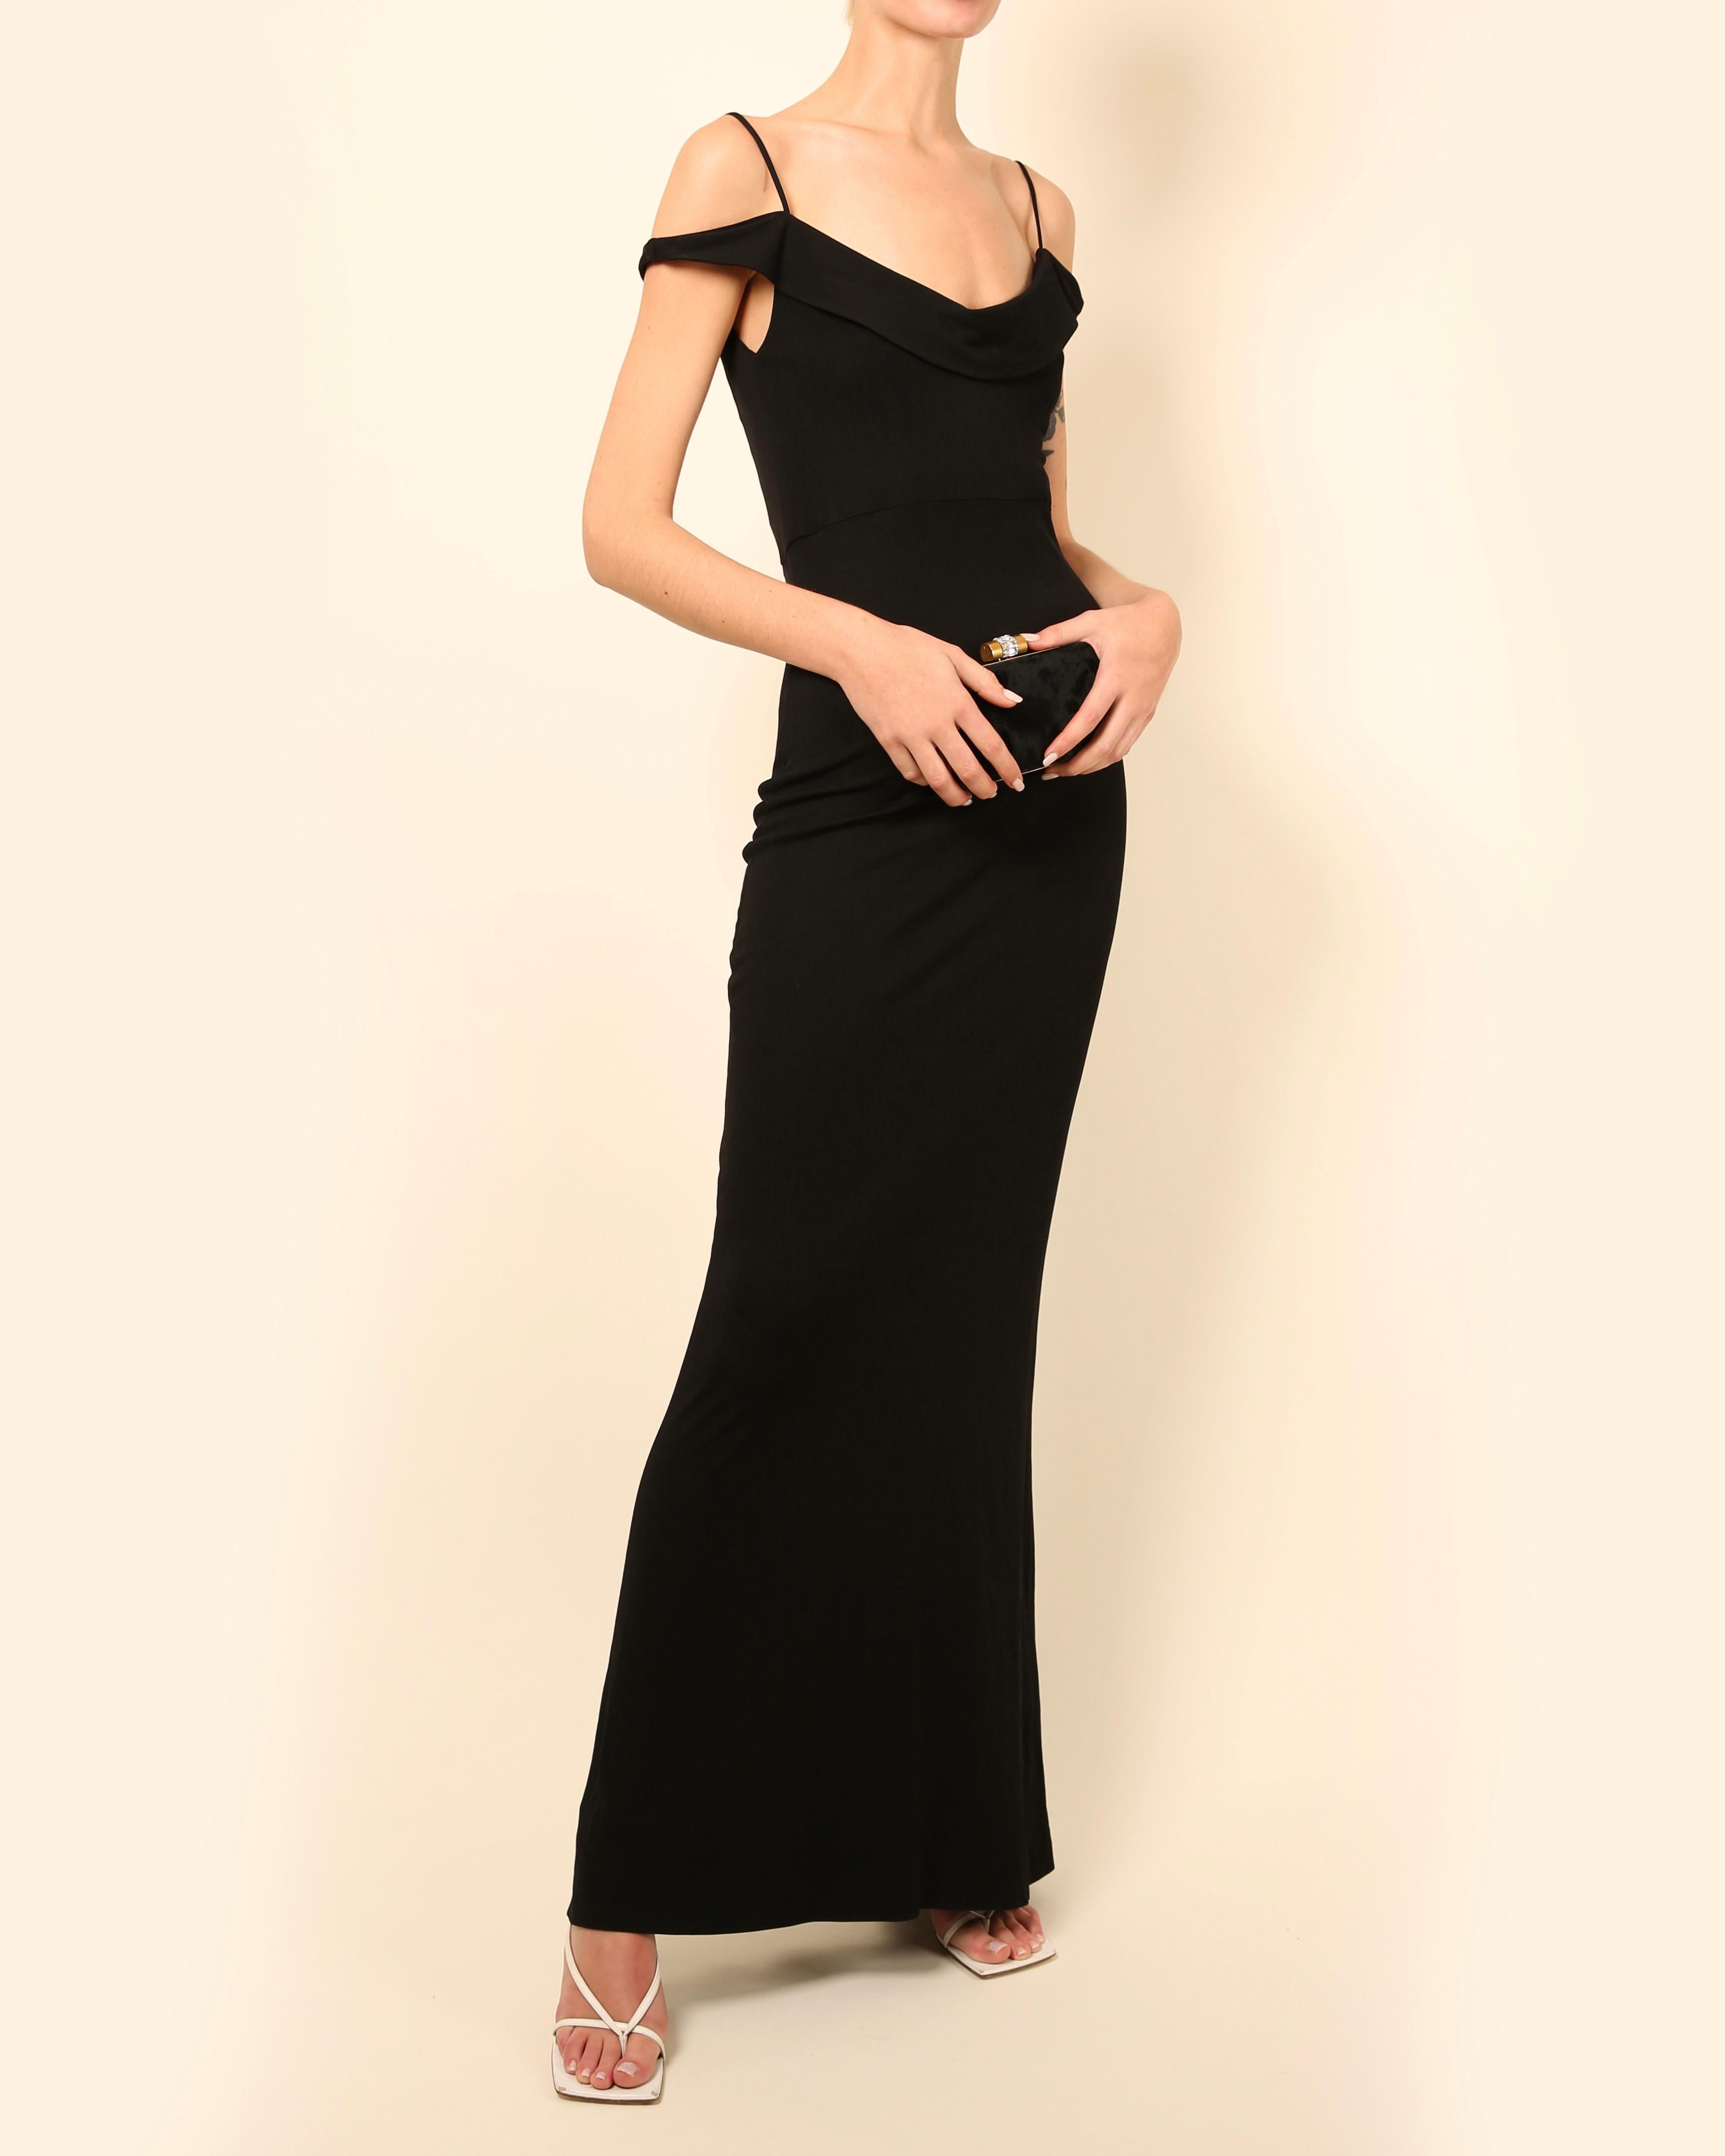 fitted floor length dress